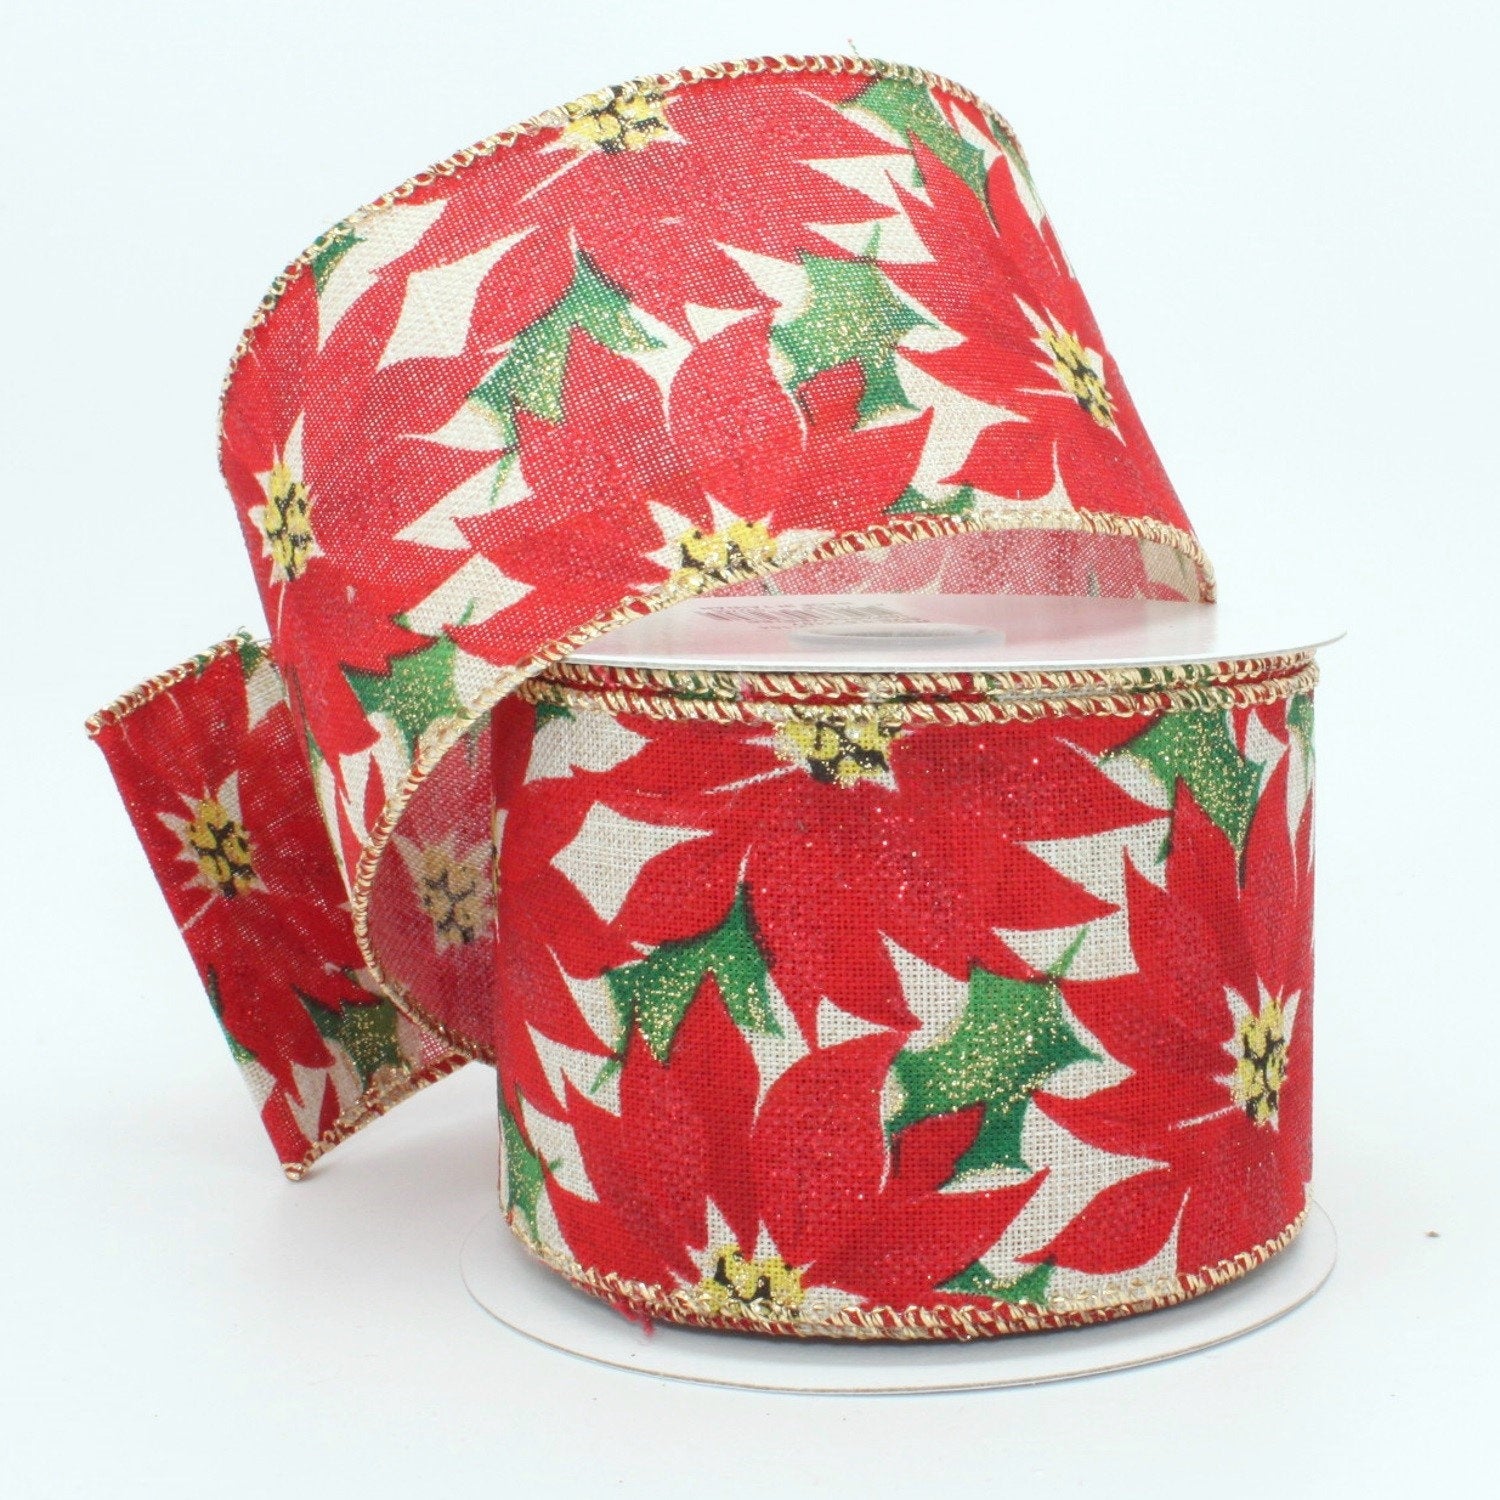 2.5 Rustic Sparkle Poinsettia Christmas Wired Ribbon (10 yards)